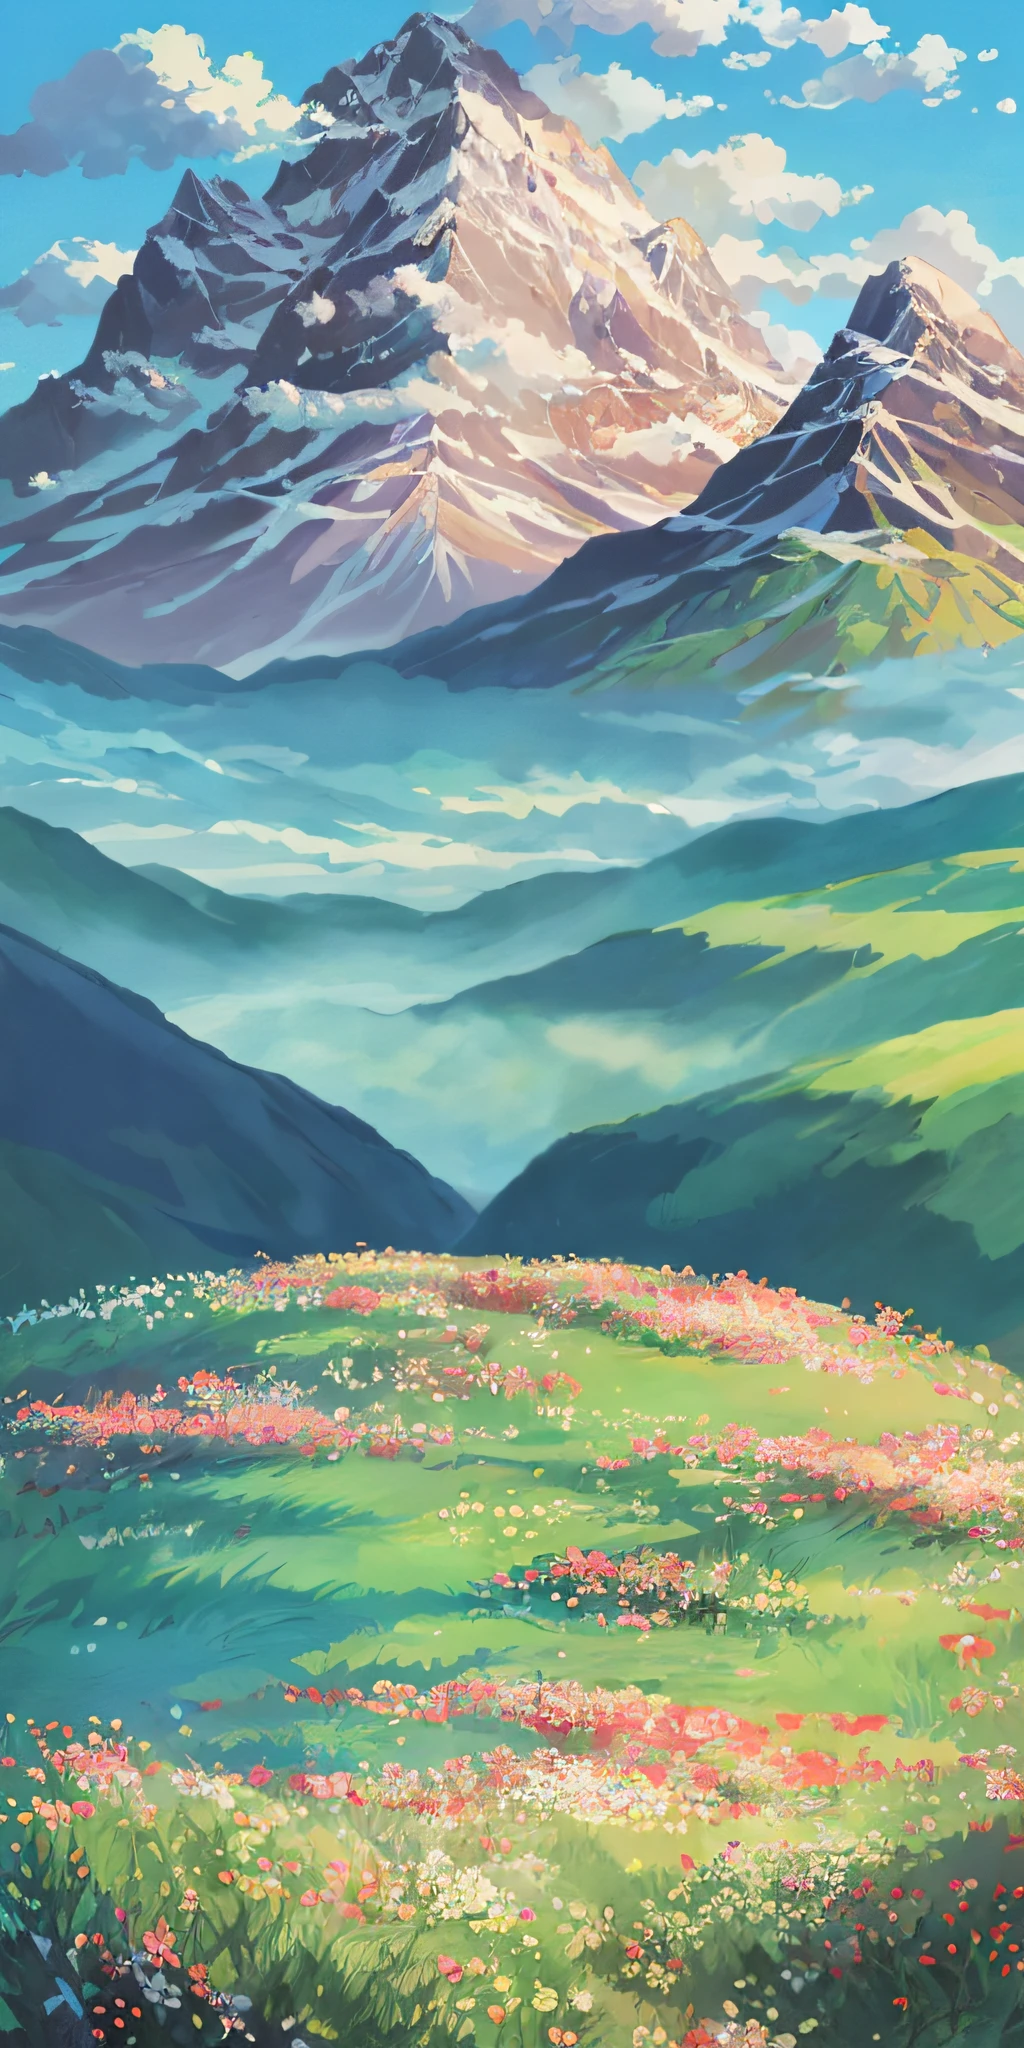 Masterpiece, highest quality, radiant flowery field between two mountains, tarot card style illustration, pure water river, few clouds, in the style of scenery, no humans, no girl, no boy, no man, no woman